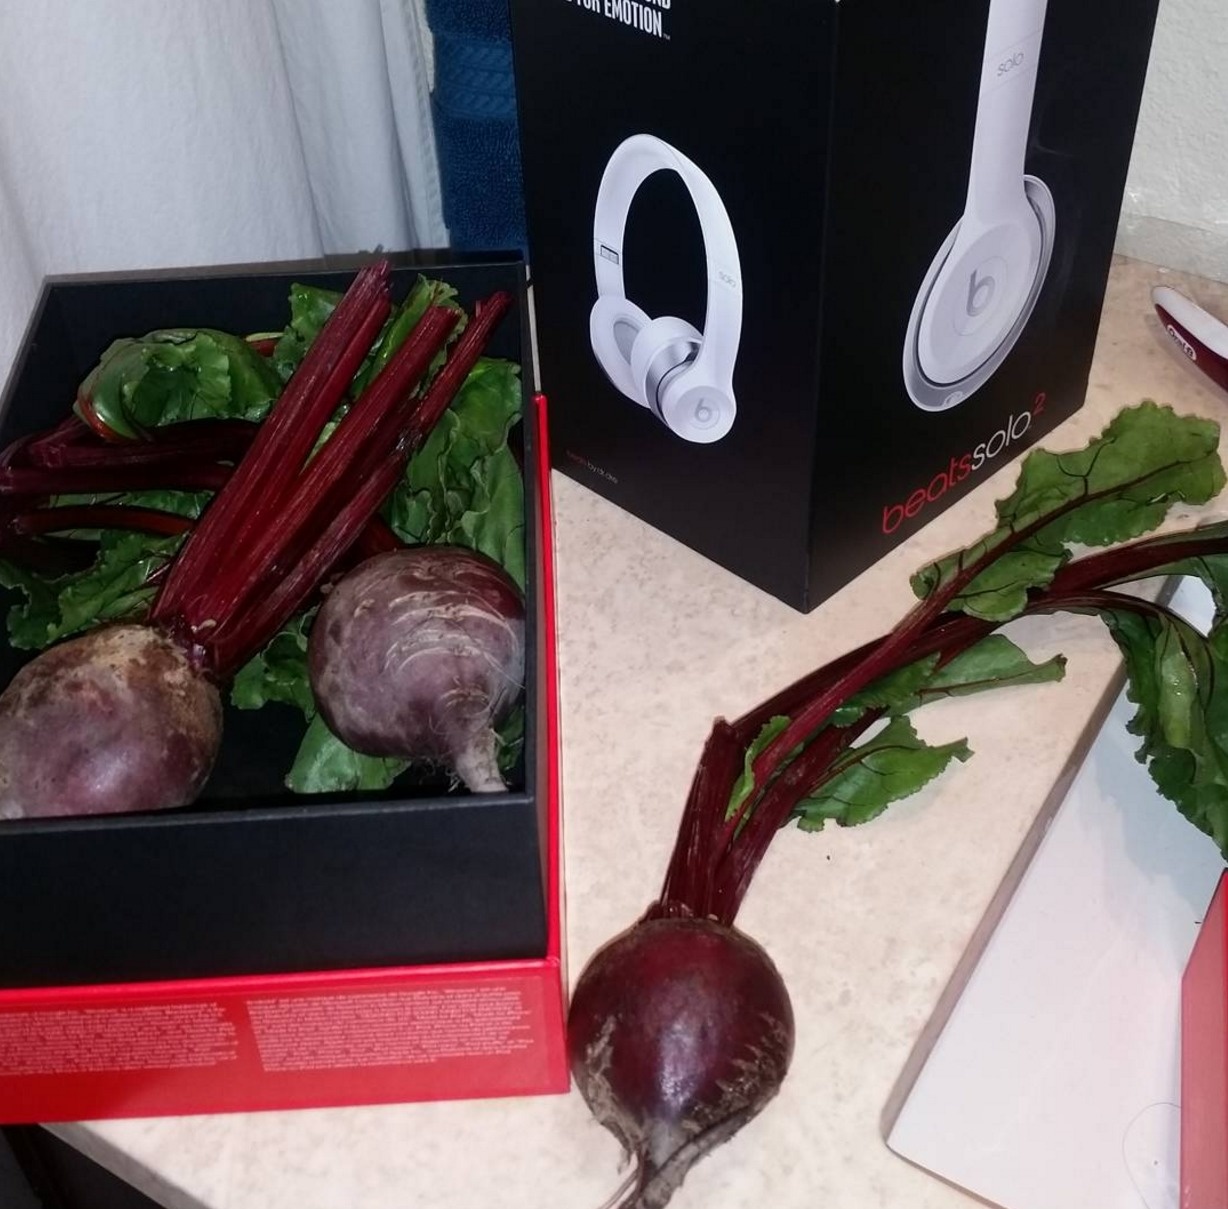 He asked to hear the beats not eat beets. 